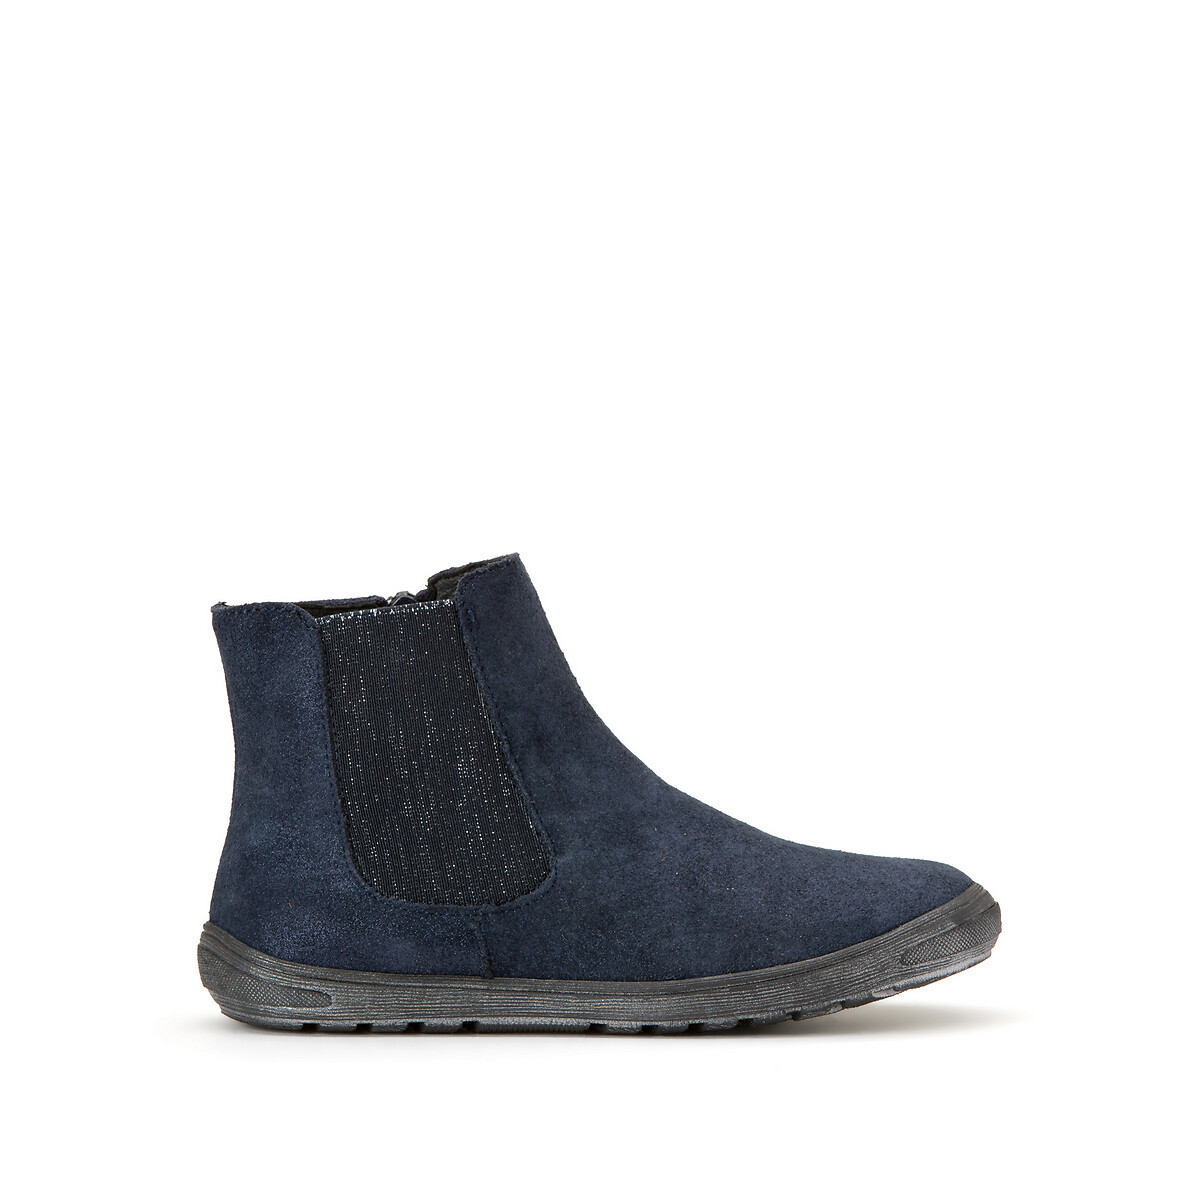 Kids suede ankle boots with zip fastening, navy blue, La Redoute ...